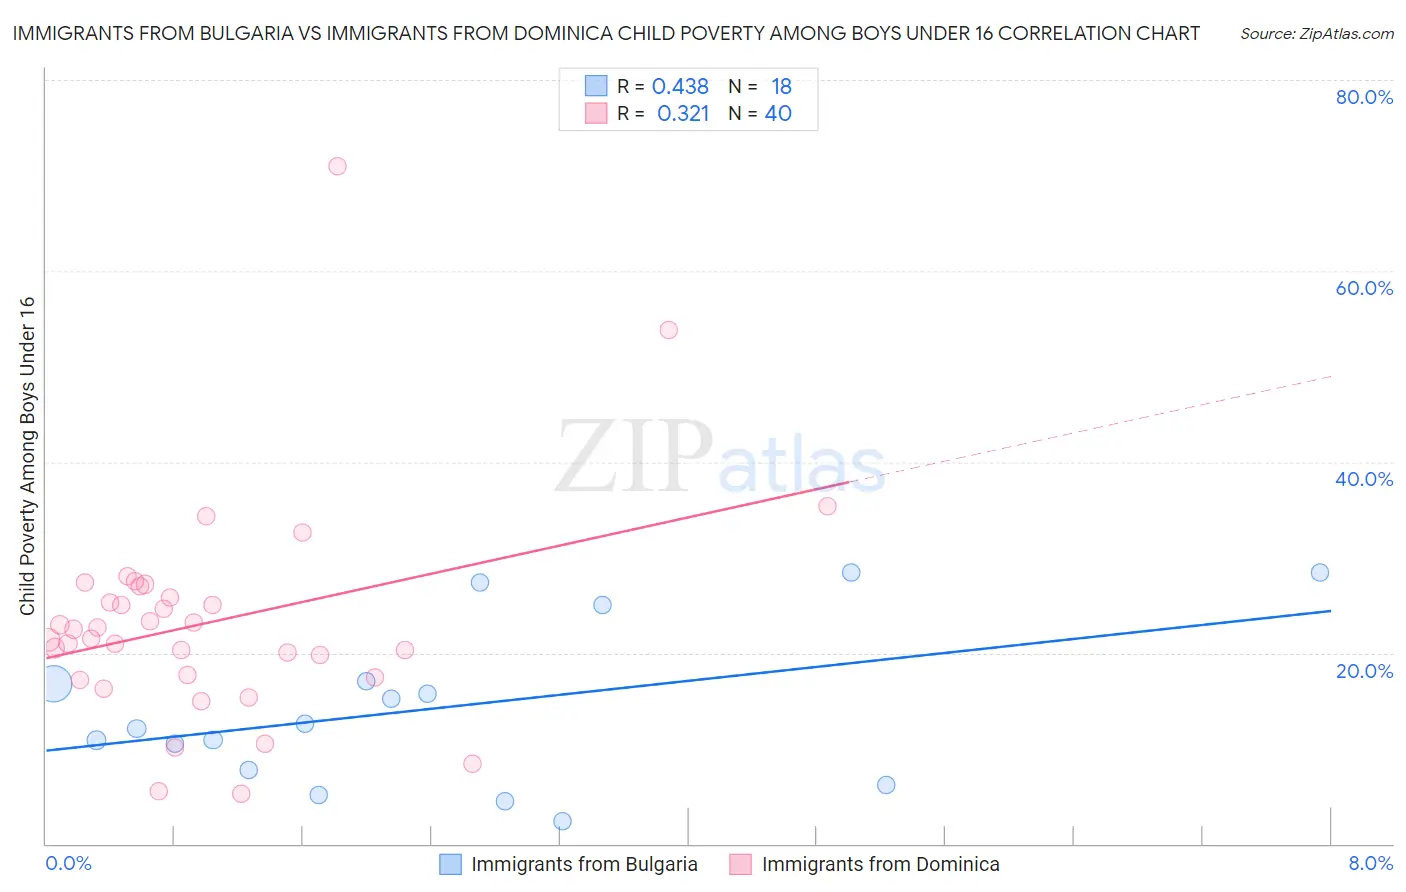 Immigrants from Bulgaria vs Immigrants from Dominica Child Poverty Among Boys Under 16